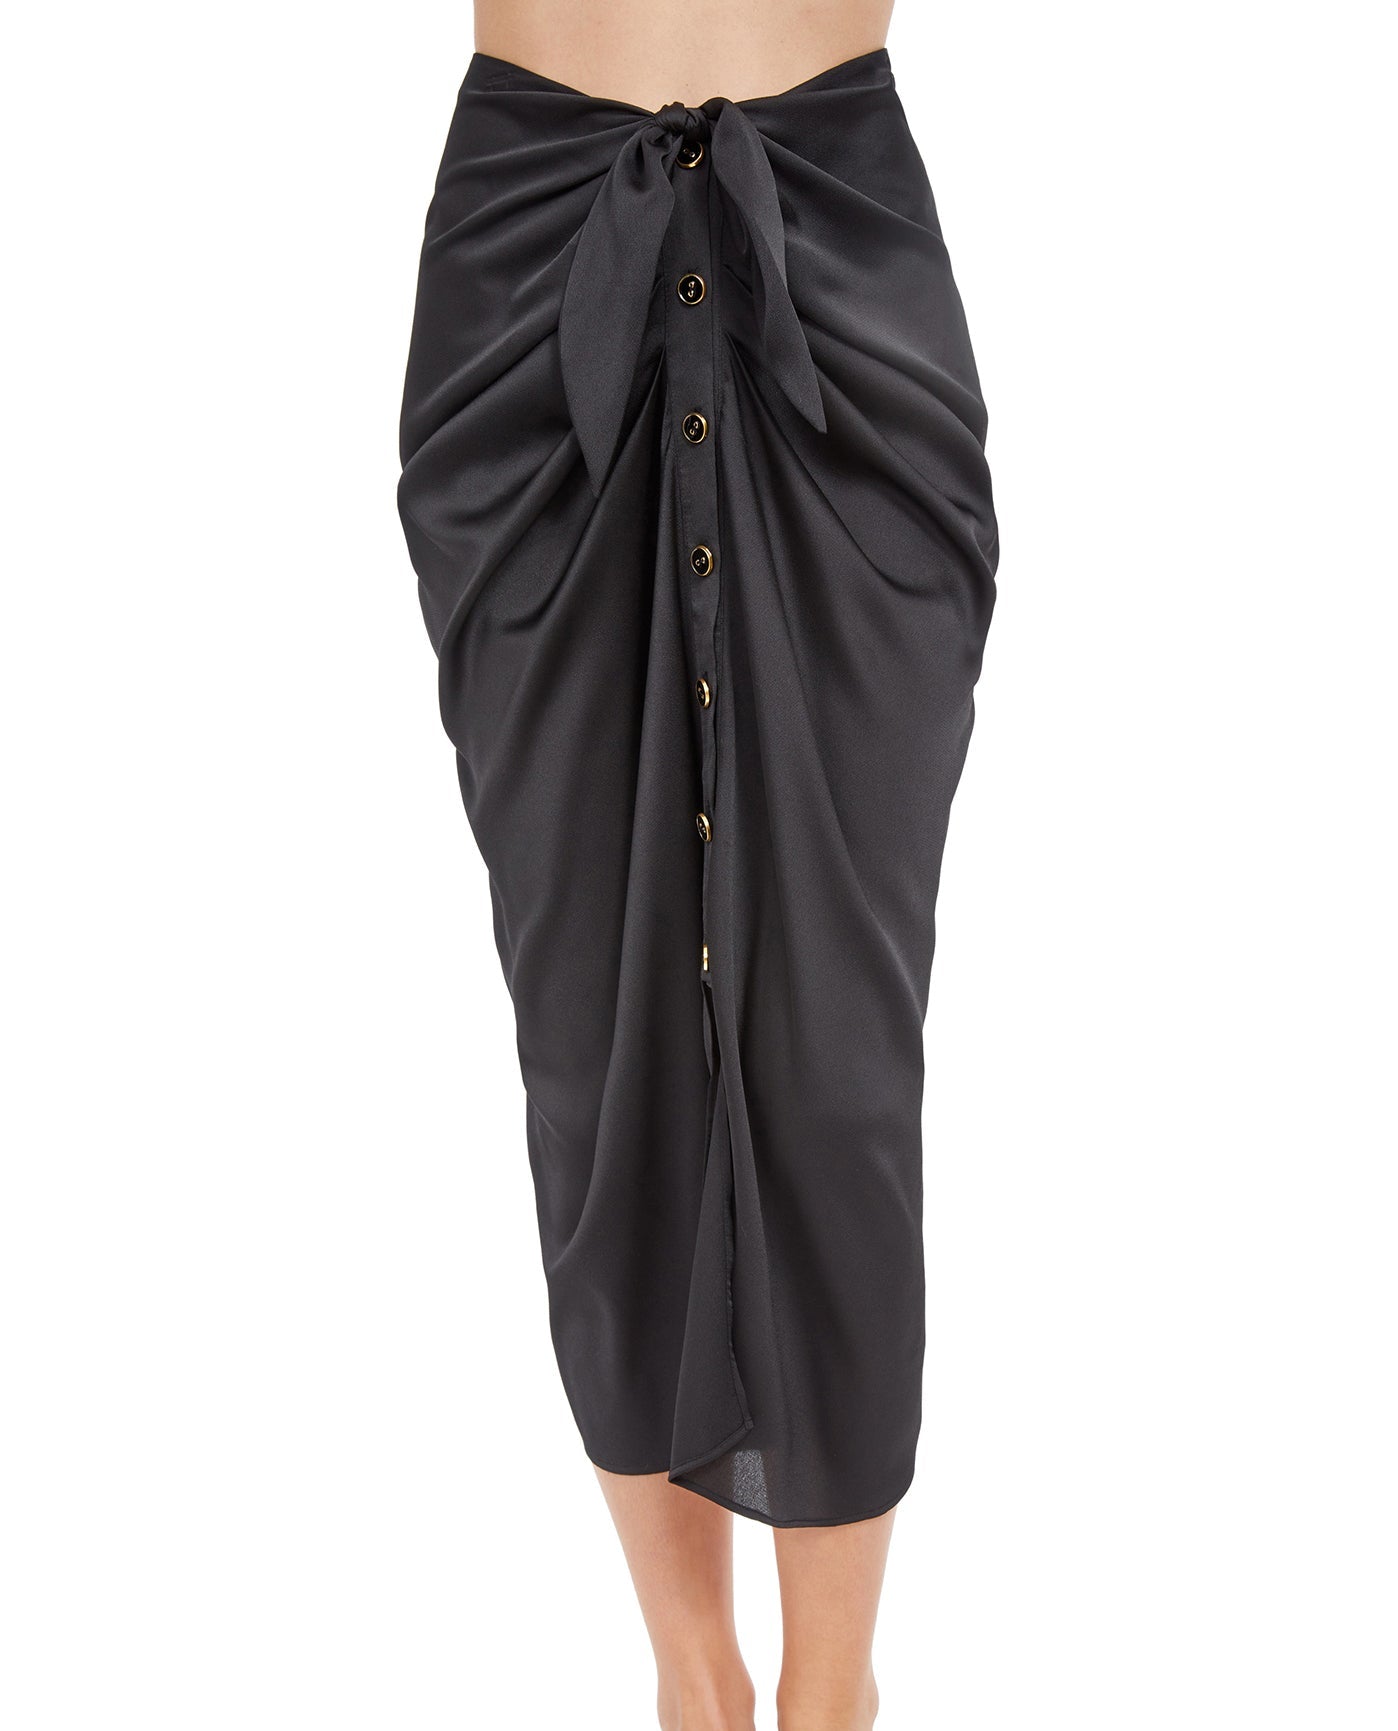 Front View Of Gottex Classic High Class Tied Sarong-Style Cover Up Skirt | Gottex High Class Black